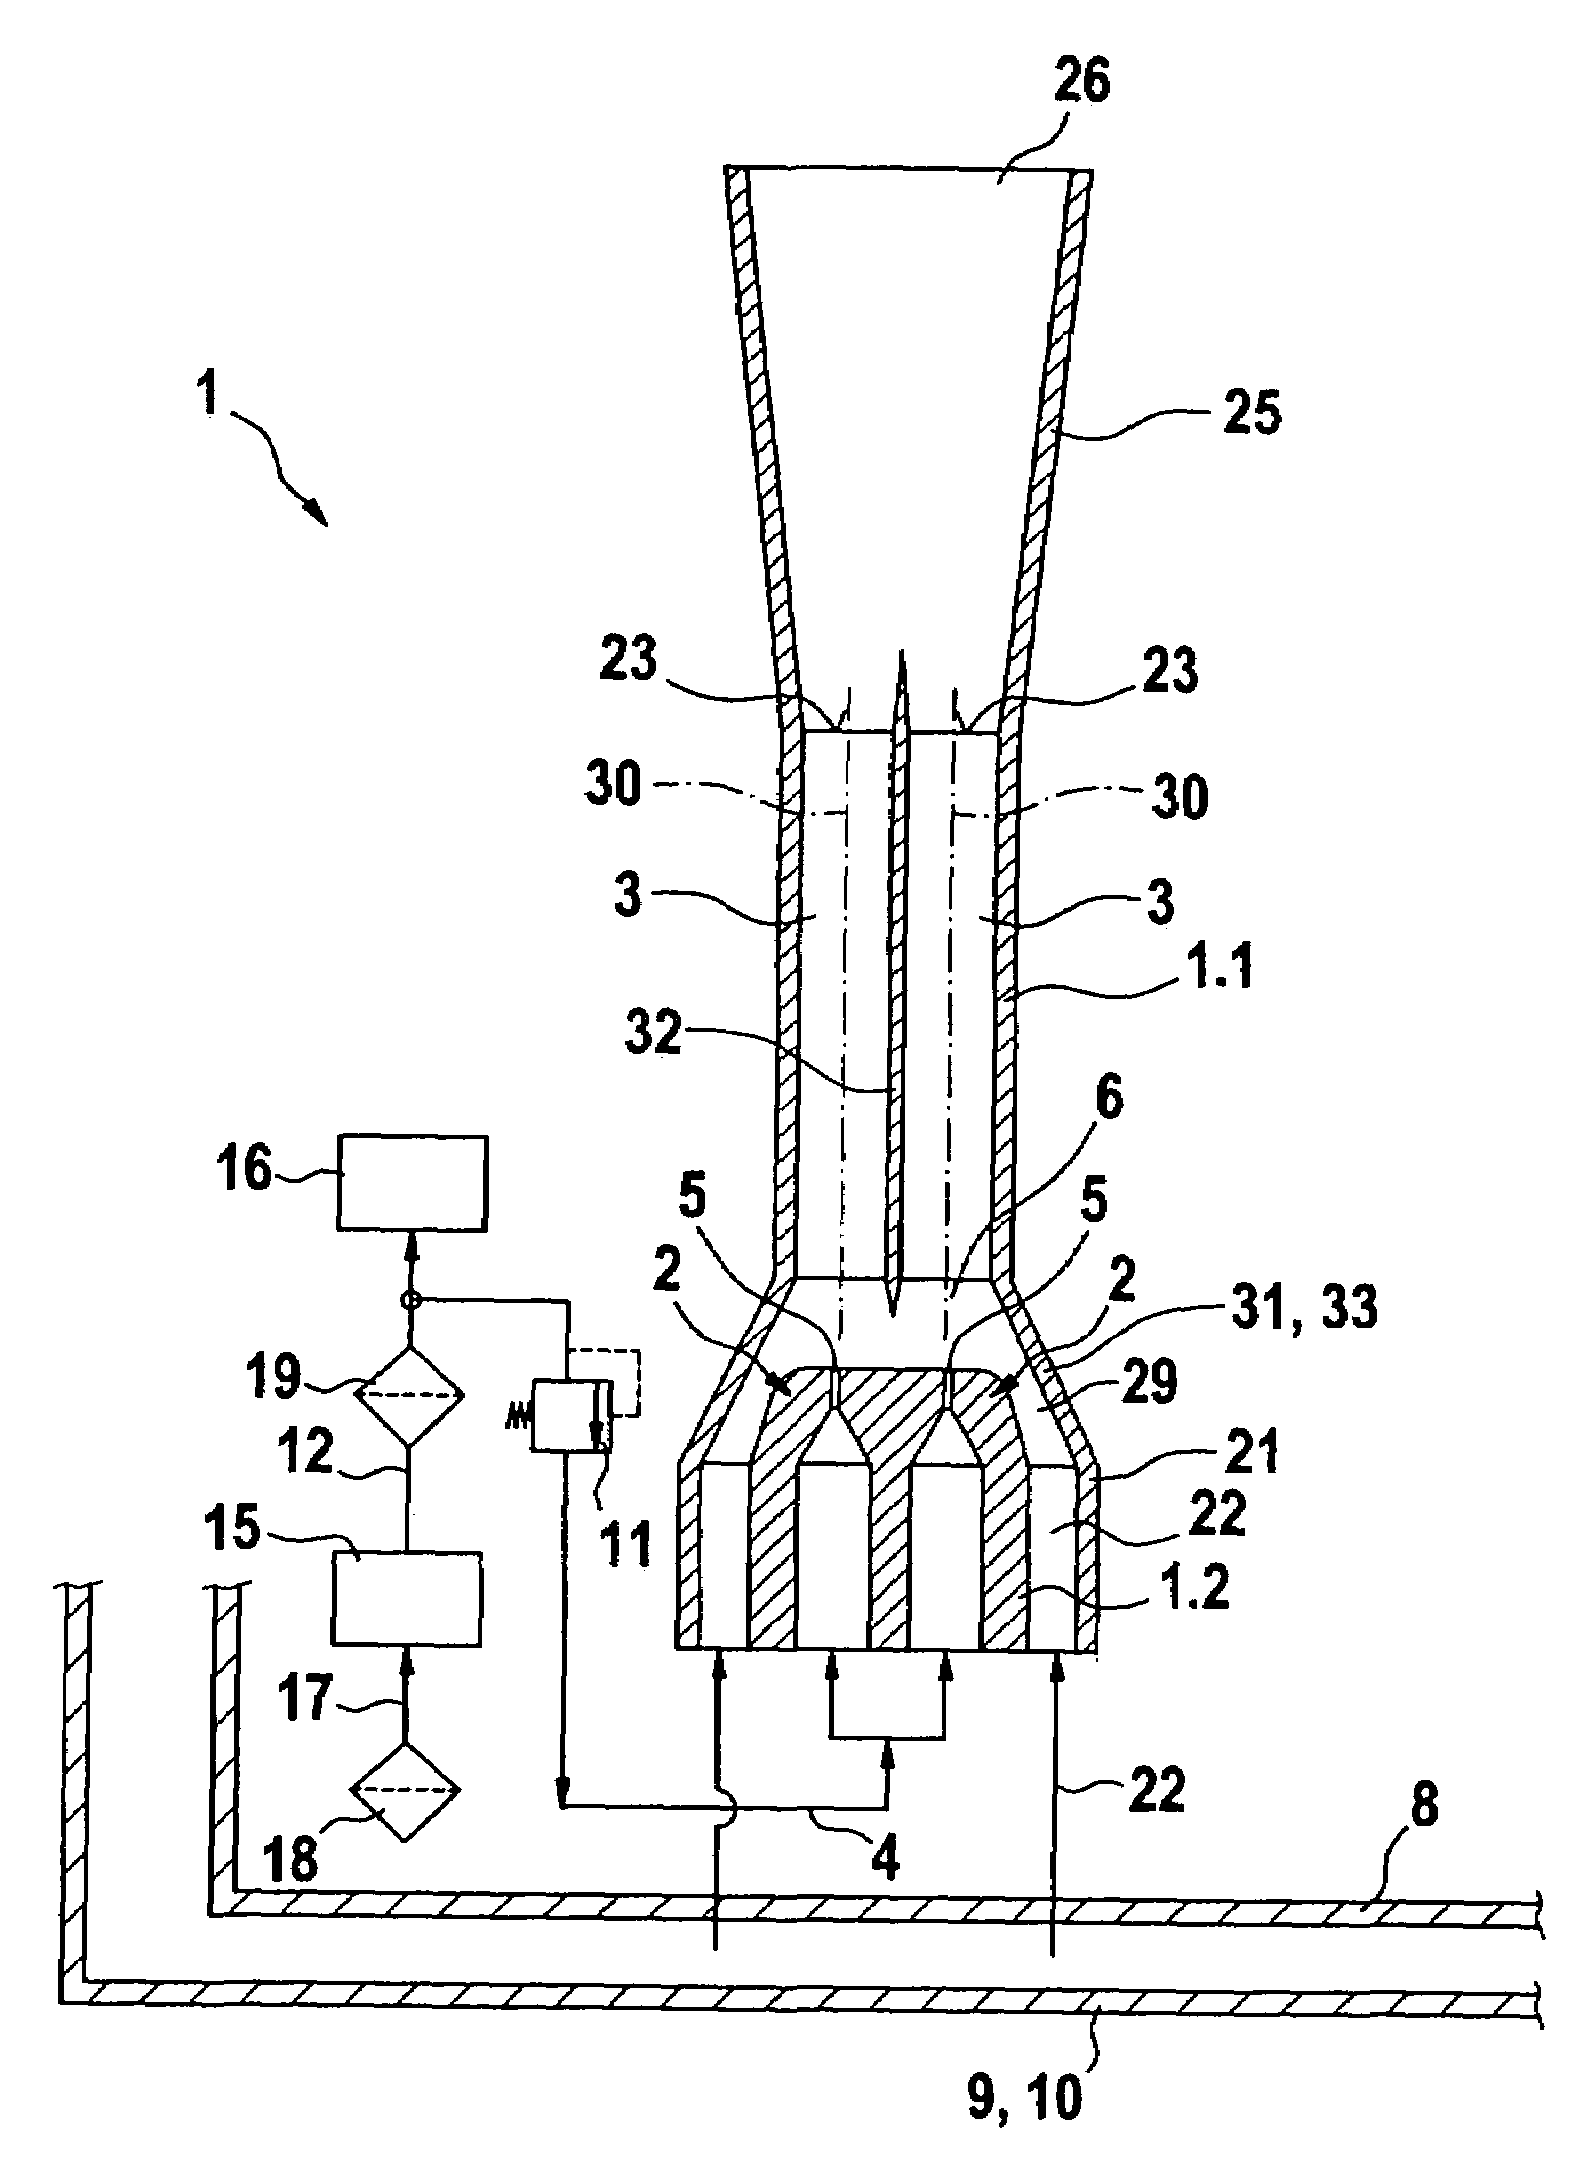 Apparatus for pumping fuel